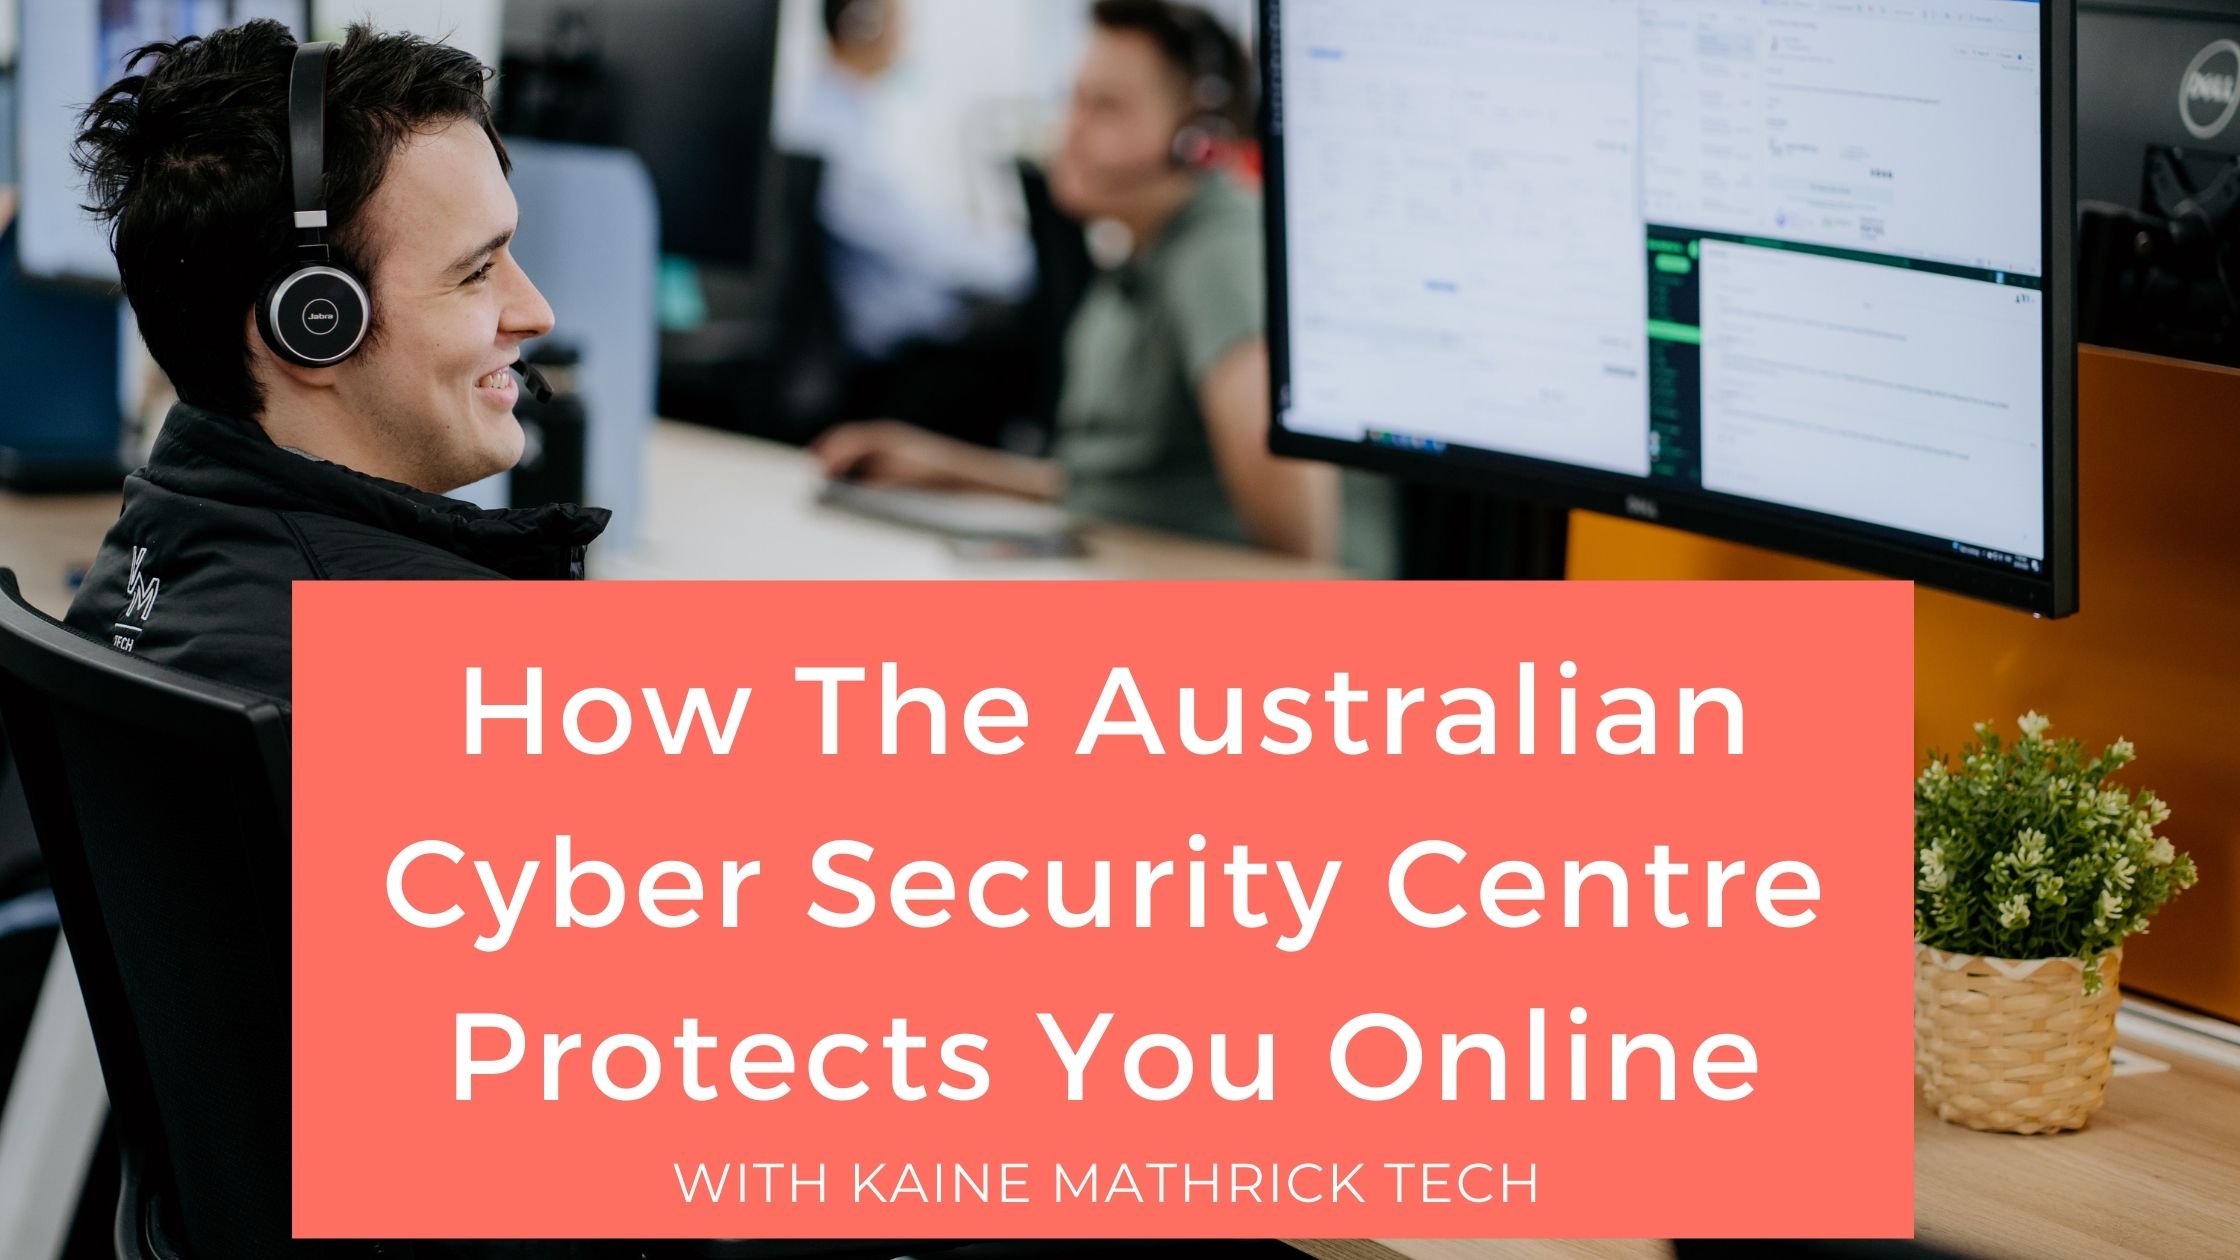 How The Australian Cyber Security Centre Protects You Online